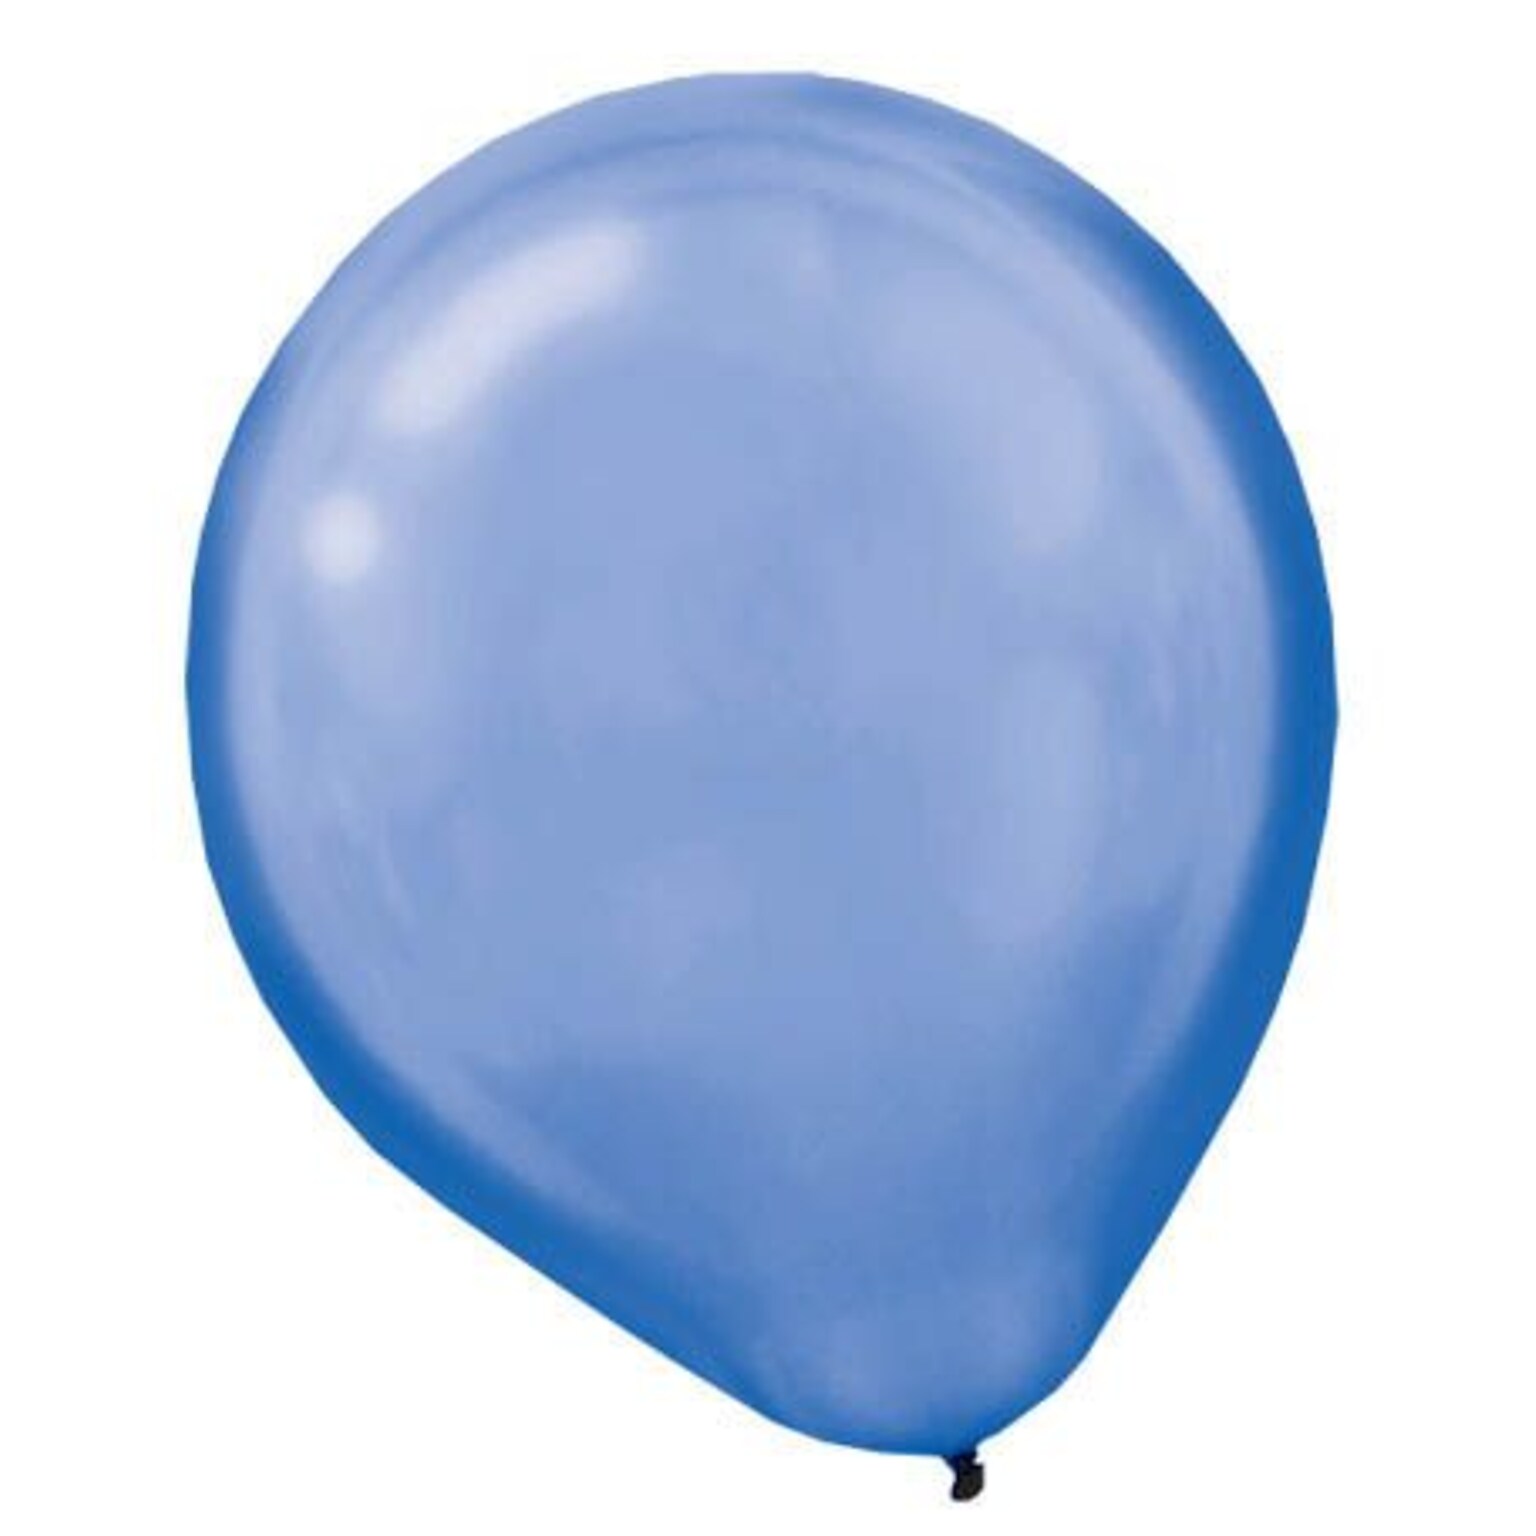 Amscan Pearlized Packaged Latex Balloons, 12, Bright Royal Blue, 3/Pack, 72 Per Pack (113251.105)